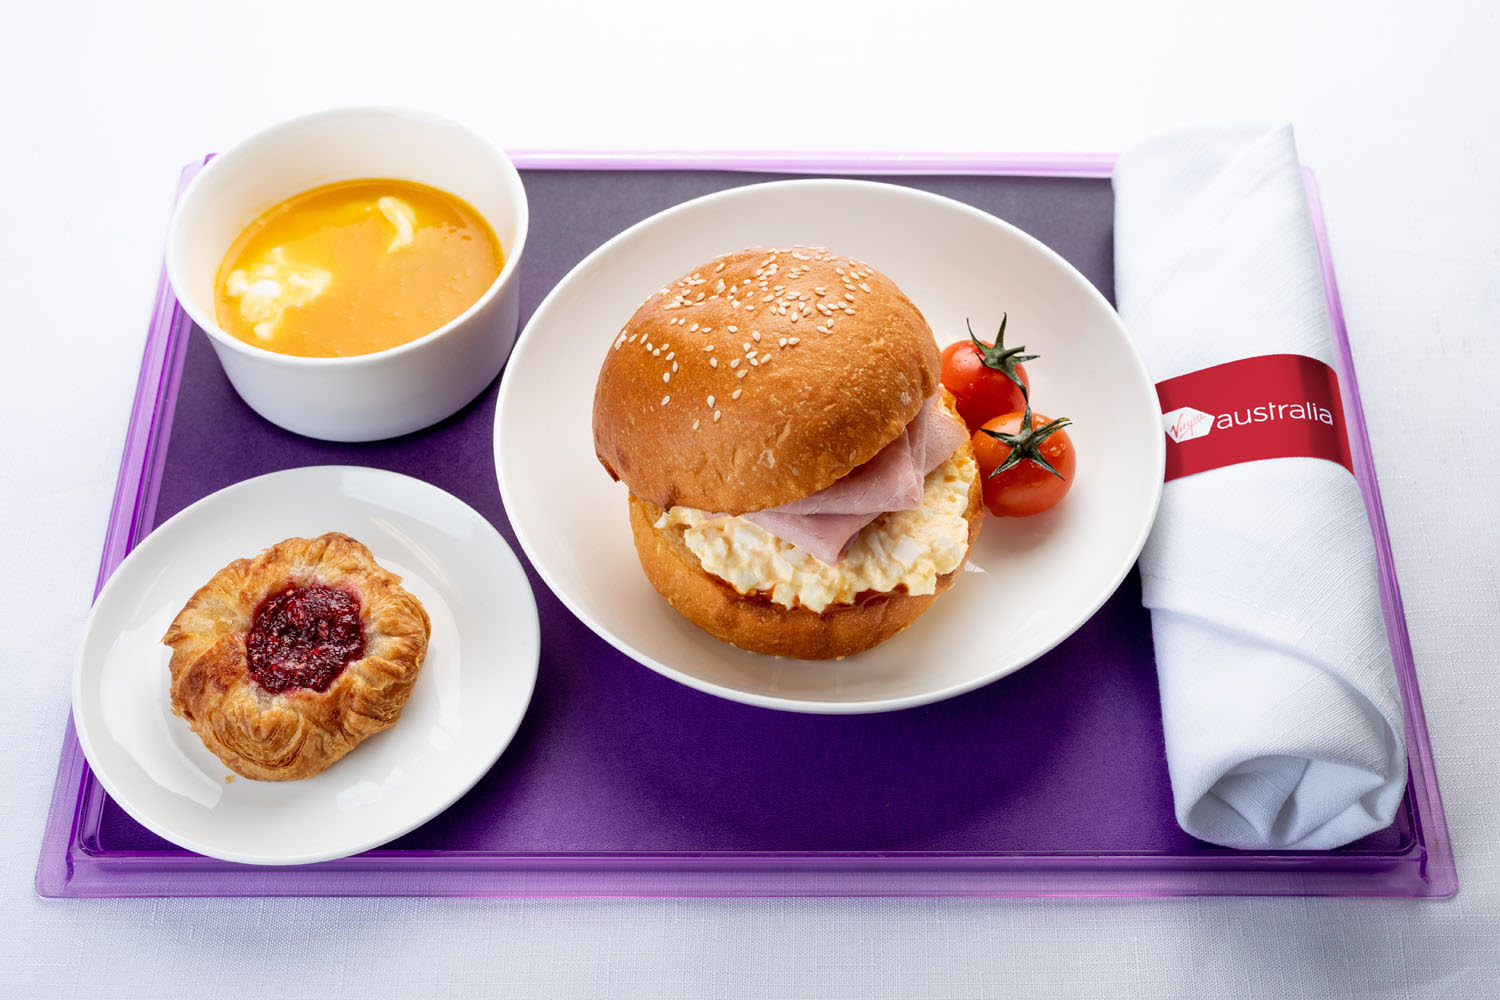 Ham and scrambled egg brioche roll with tomato relish, served alongside Greek yoghurt with mango coulis and seasonal fresh fruit Business Class offering Virgin Australia